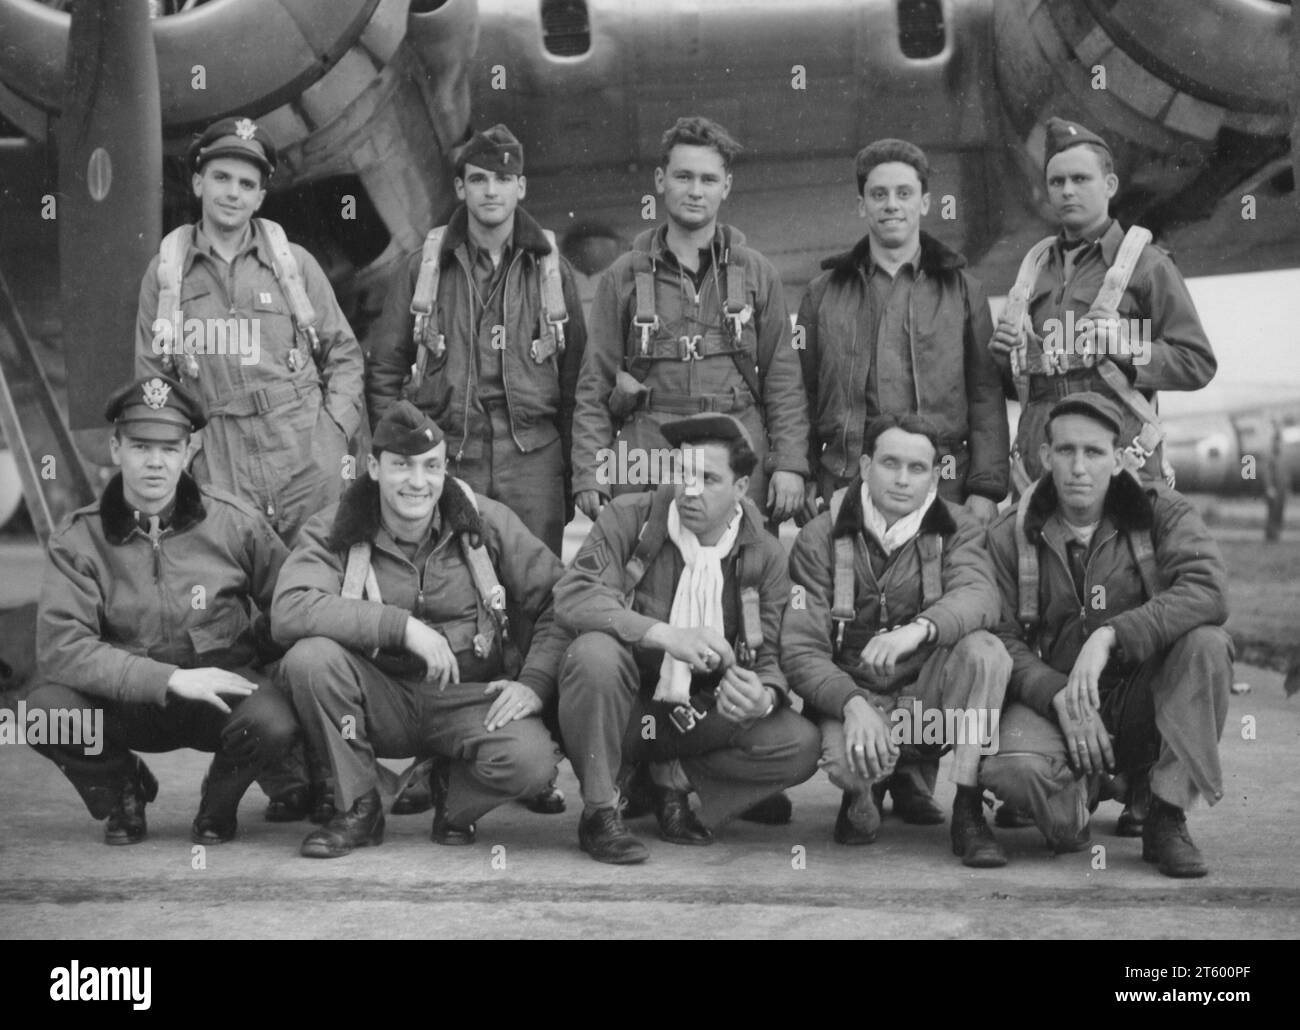 Lead Crew Of Bombing Mission To Dresden, Germany Pose Beside A Boeing B-17 Flying Fortress. 359Th Bomb Squadron, 303Rd Bomb Group, England. 17 April 1944 Stock Photo